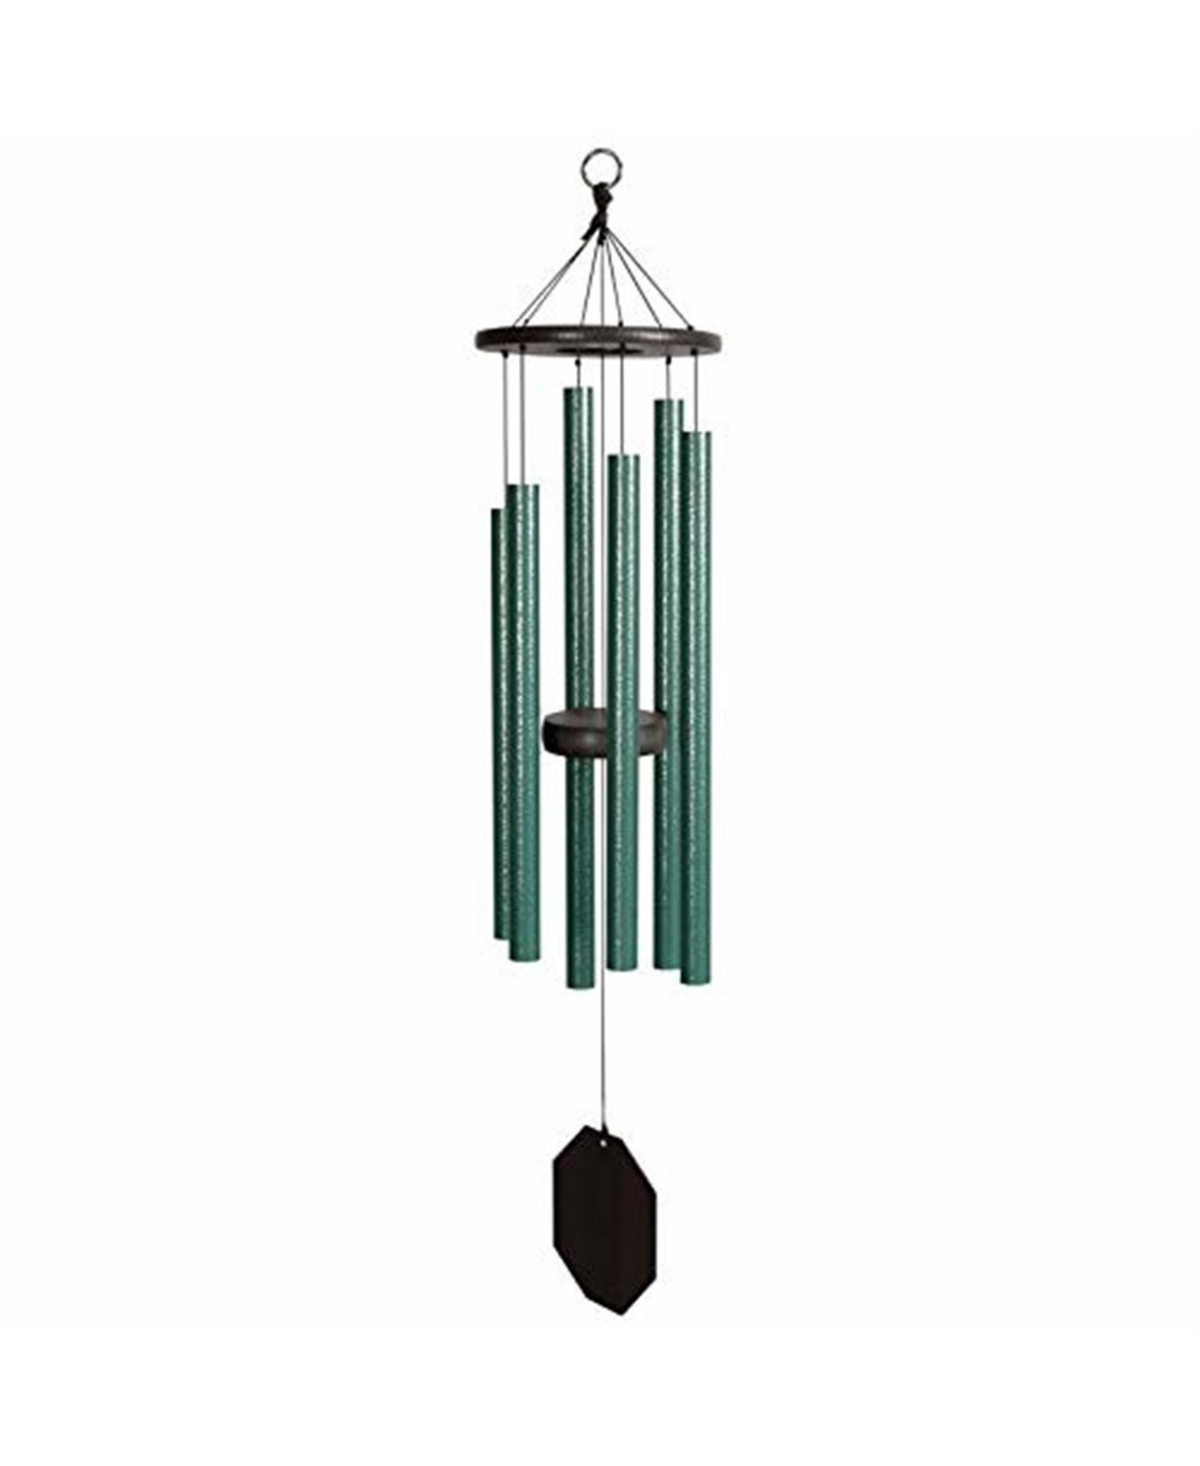 Lambright Chimes, Amish Crafted Songbird Wind Chime, 36 Inches - Multi